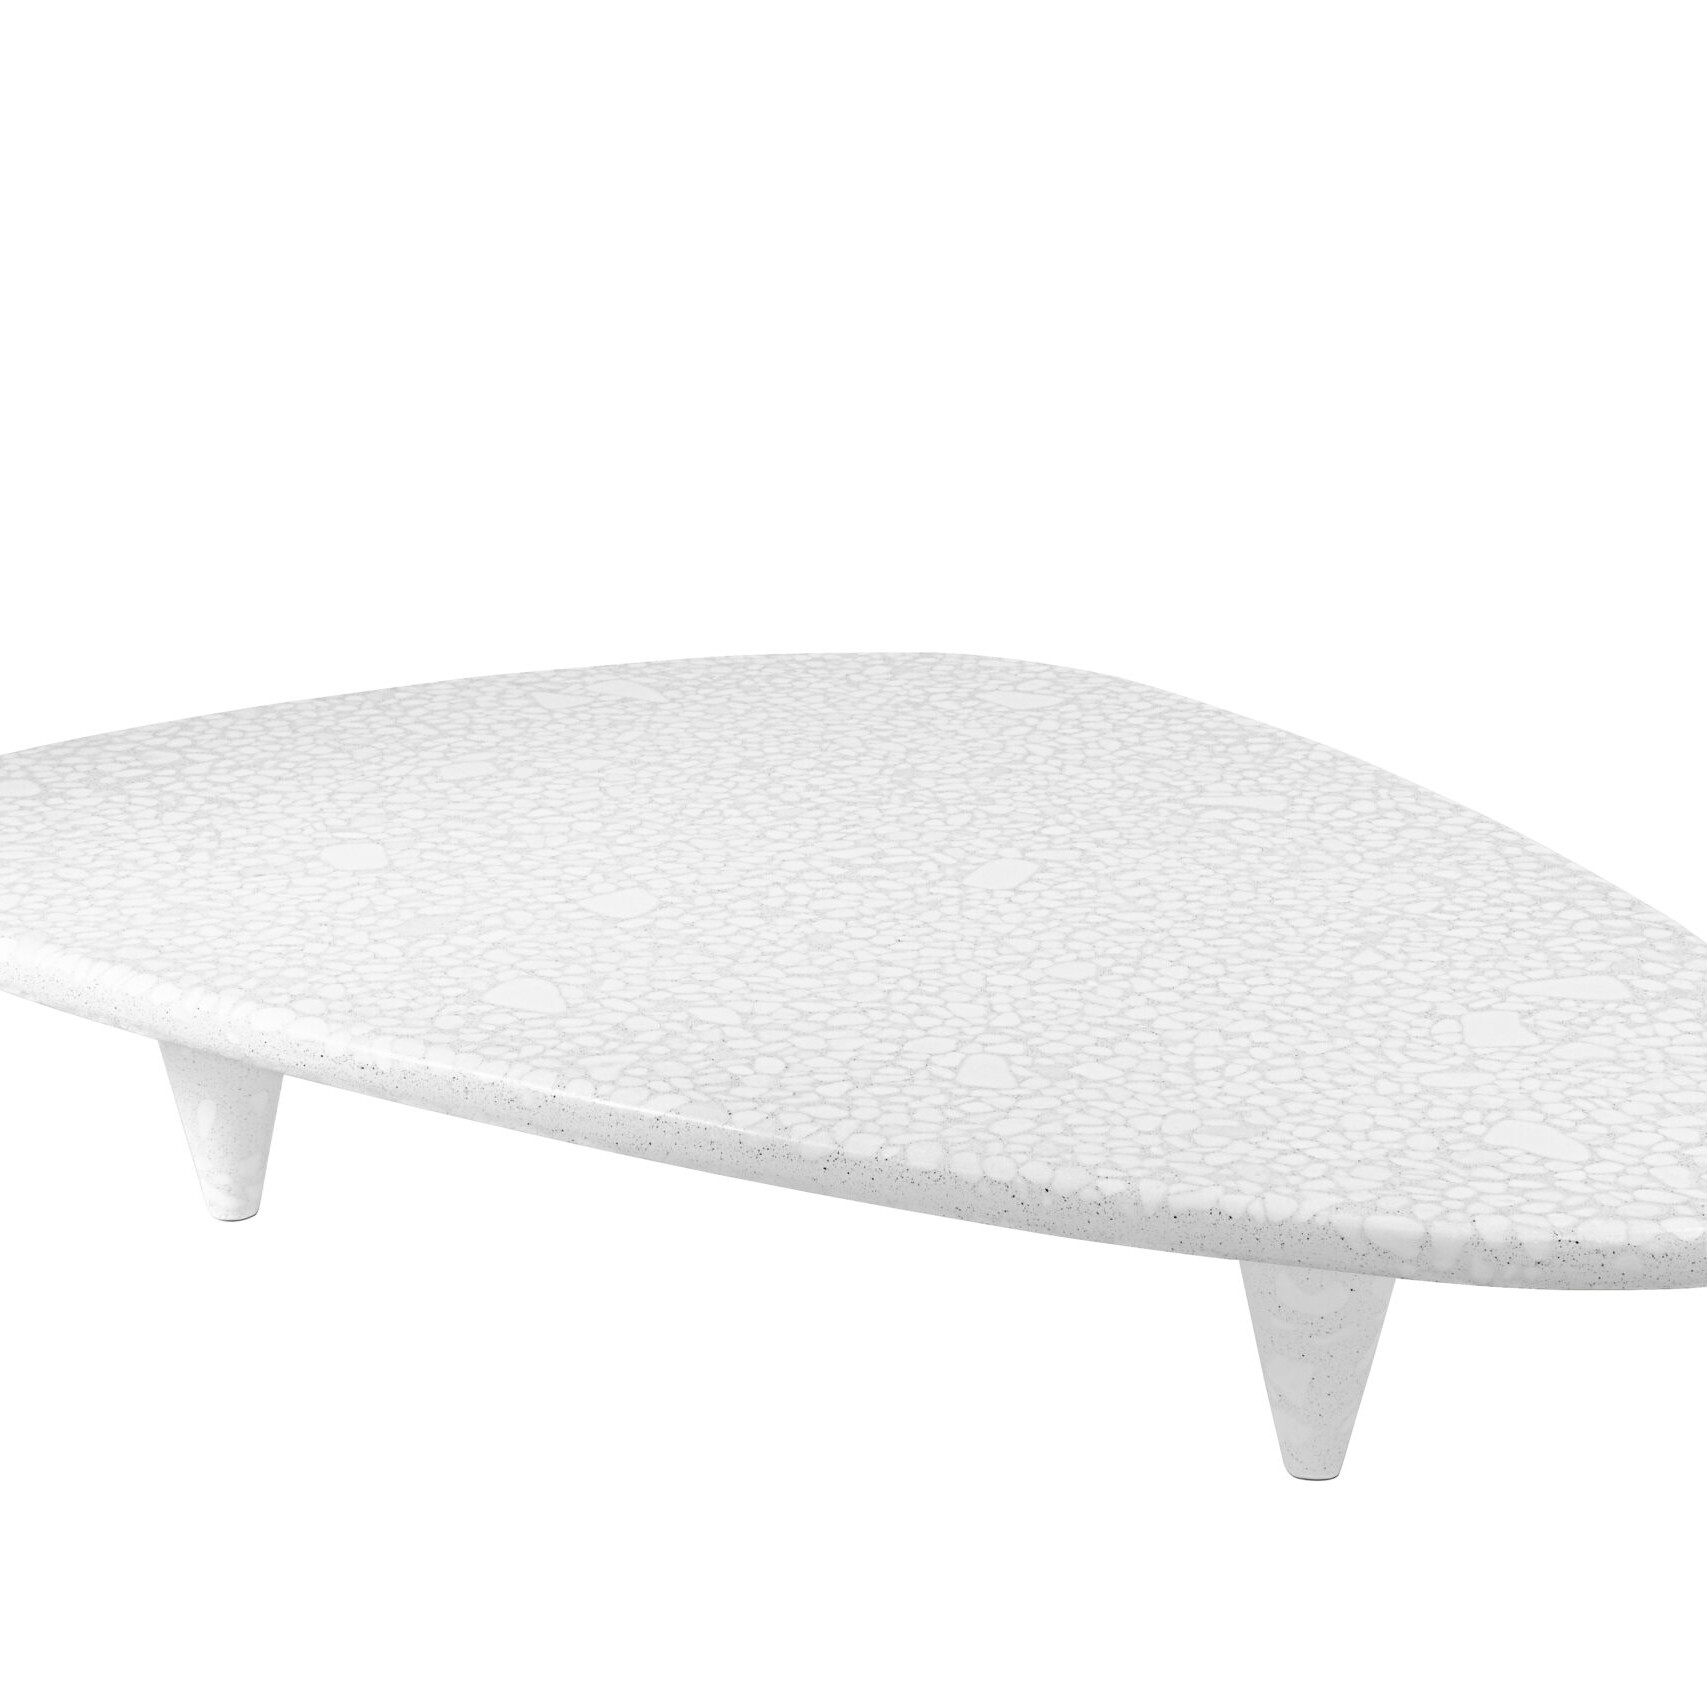 Tria cement coffee table by urbi et orbi scaled